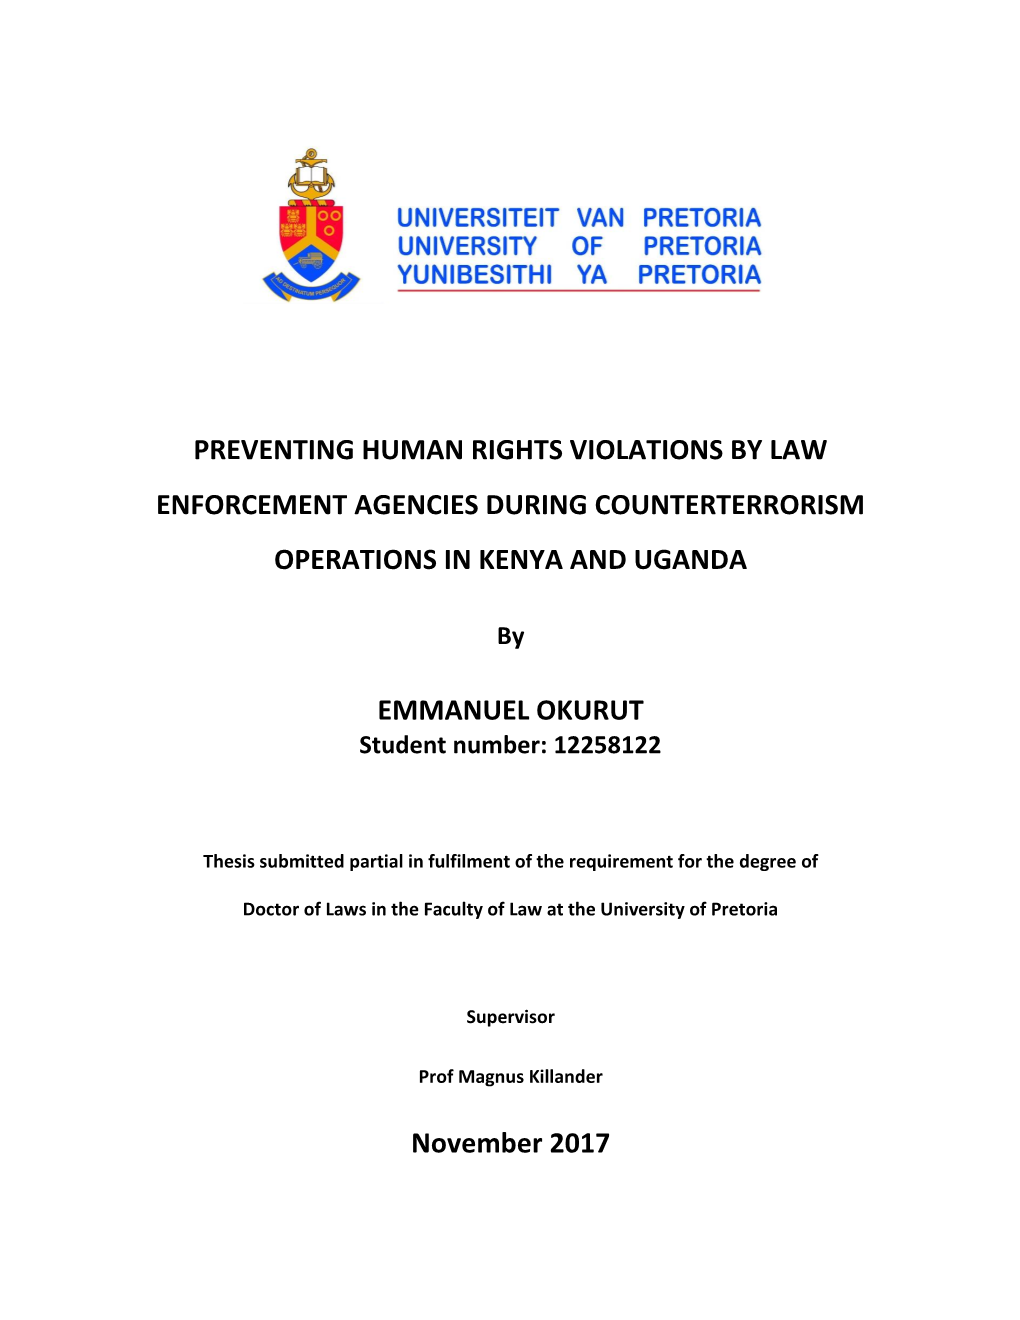 Preventing Human Rights Violations by Law Enforcement Agencies During Counterterrorism Operations in Kenya and Uganda